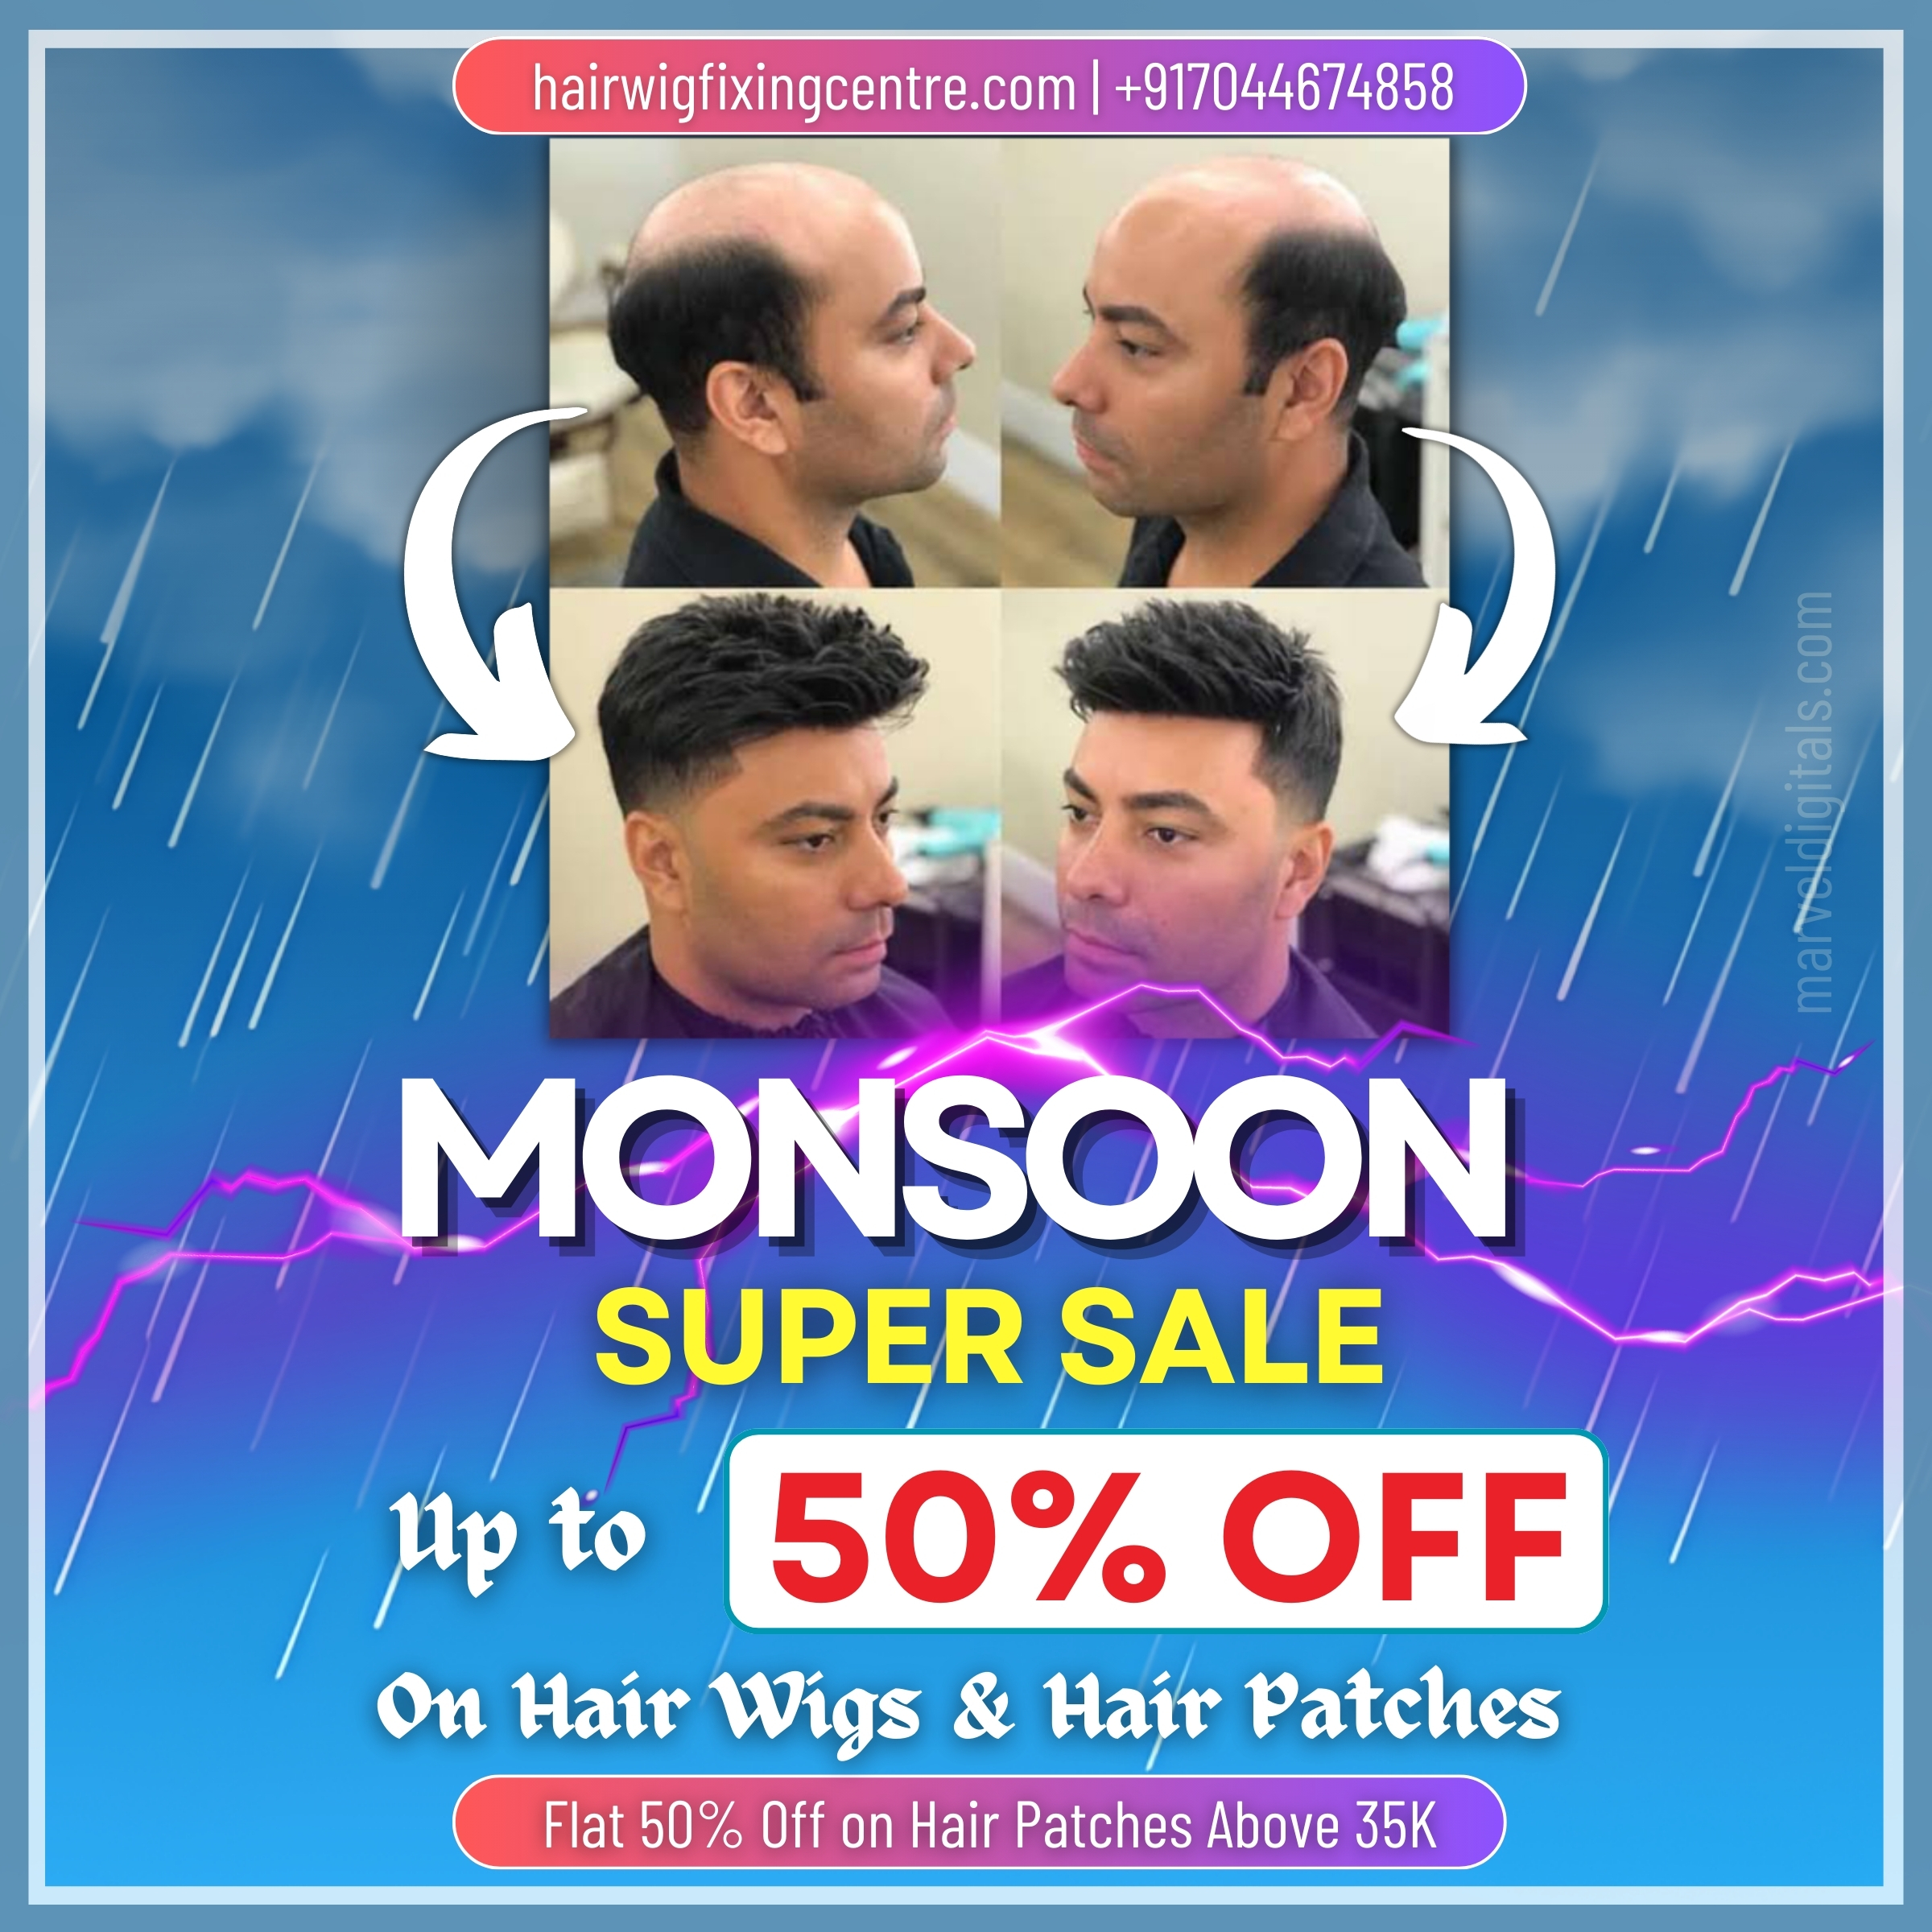 Get back hair style with non-surgical hair replcaement in kolkata, starting just ₹5999. Monsoon offer on hair wigs and hair patches with up to 50% Off on all hair wigs and hair patches above hair wigs of 35 thousand.